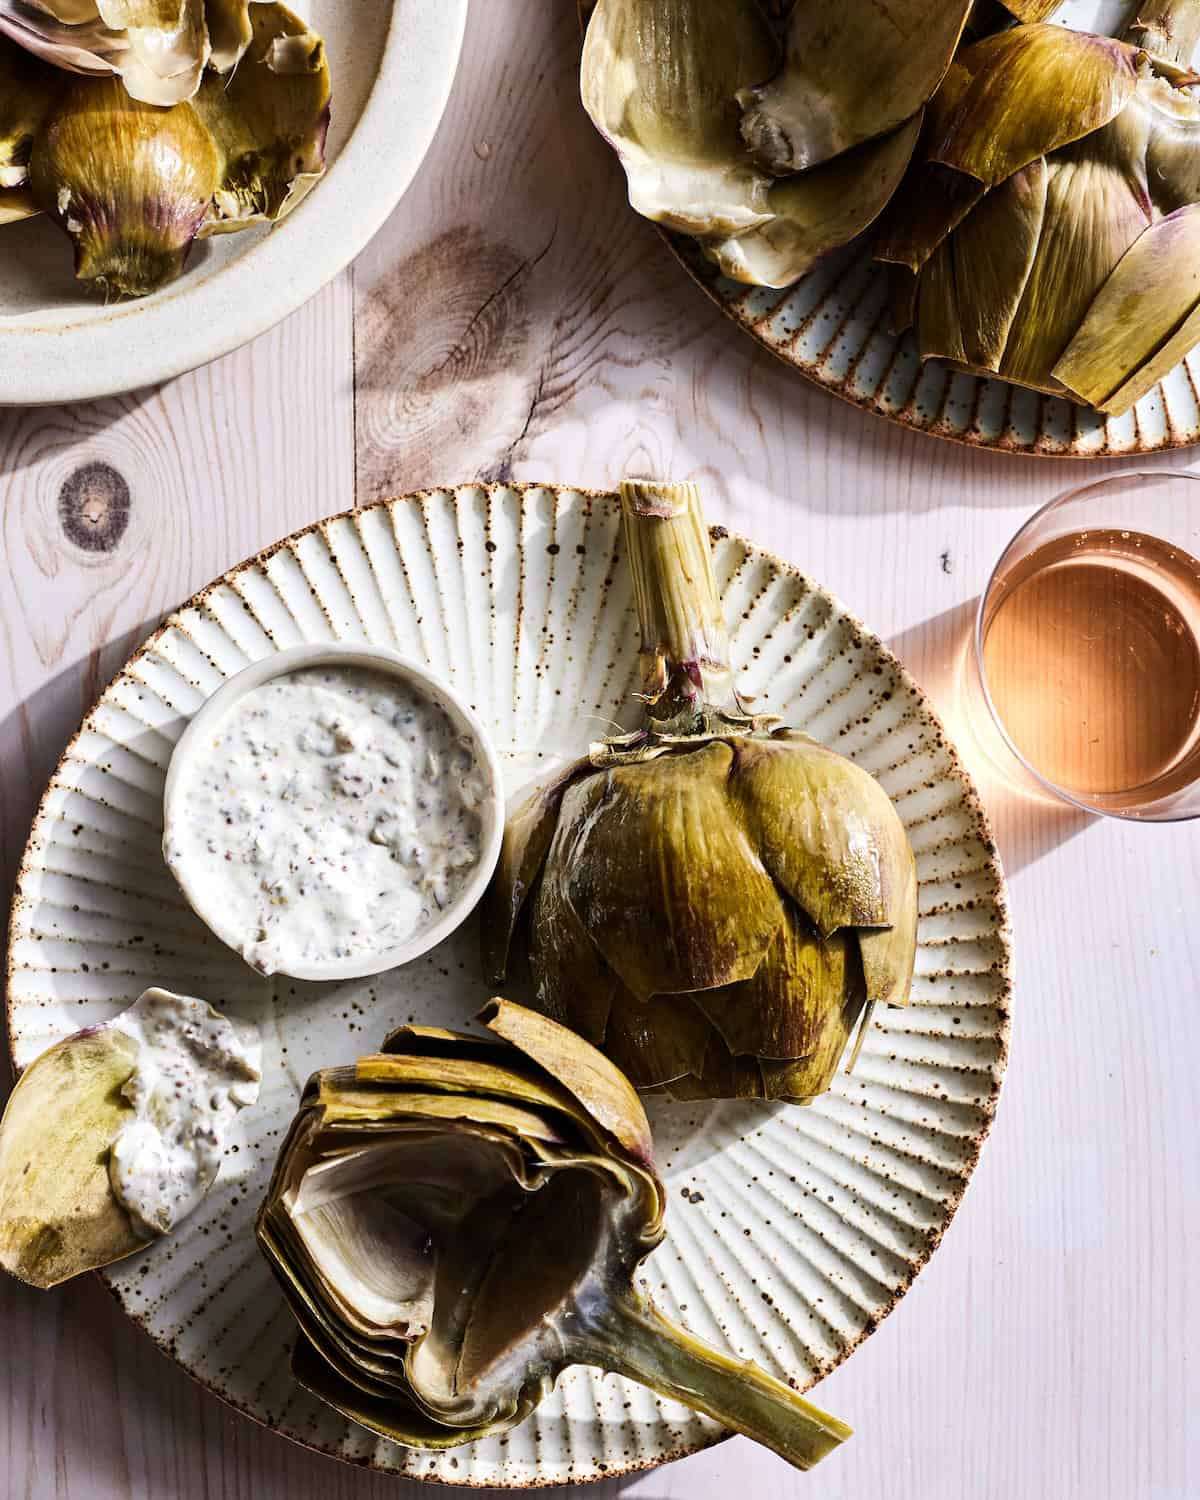 Steamed Artichokes with a Caper Dipping Sauce